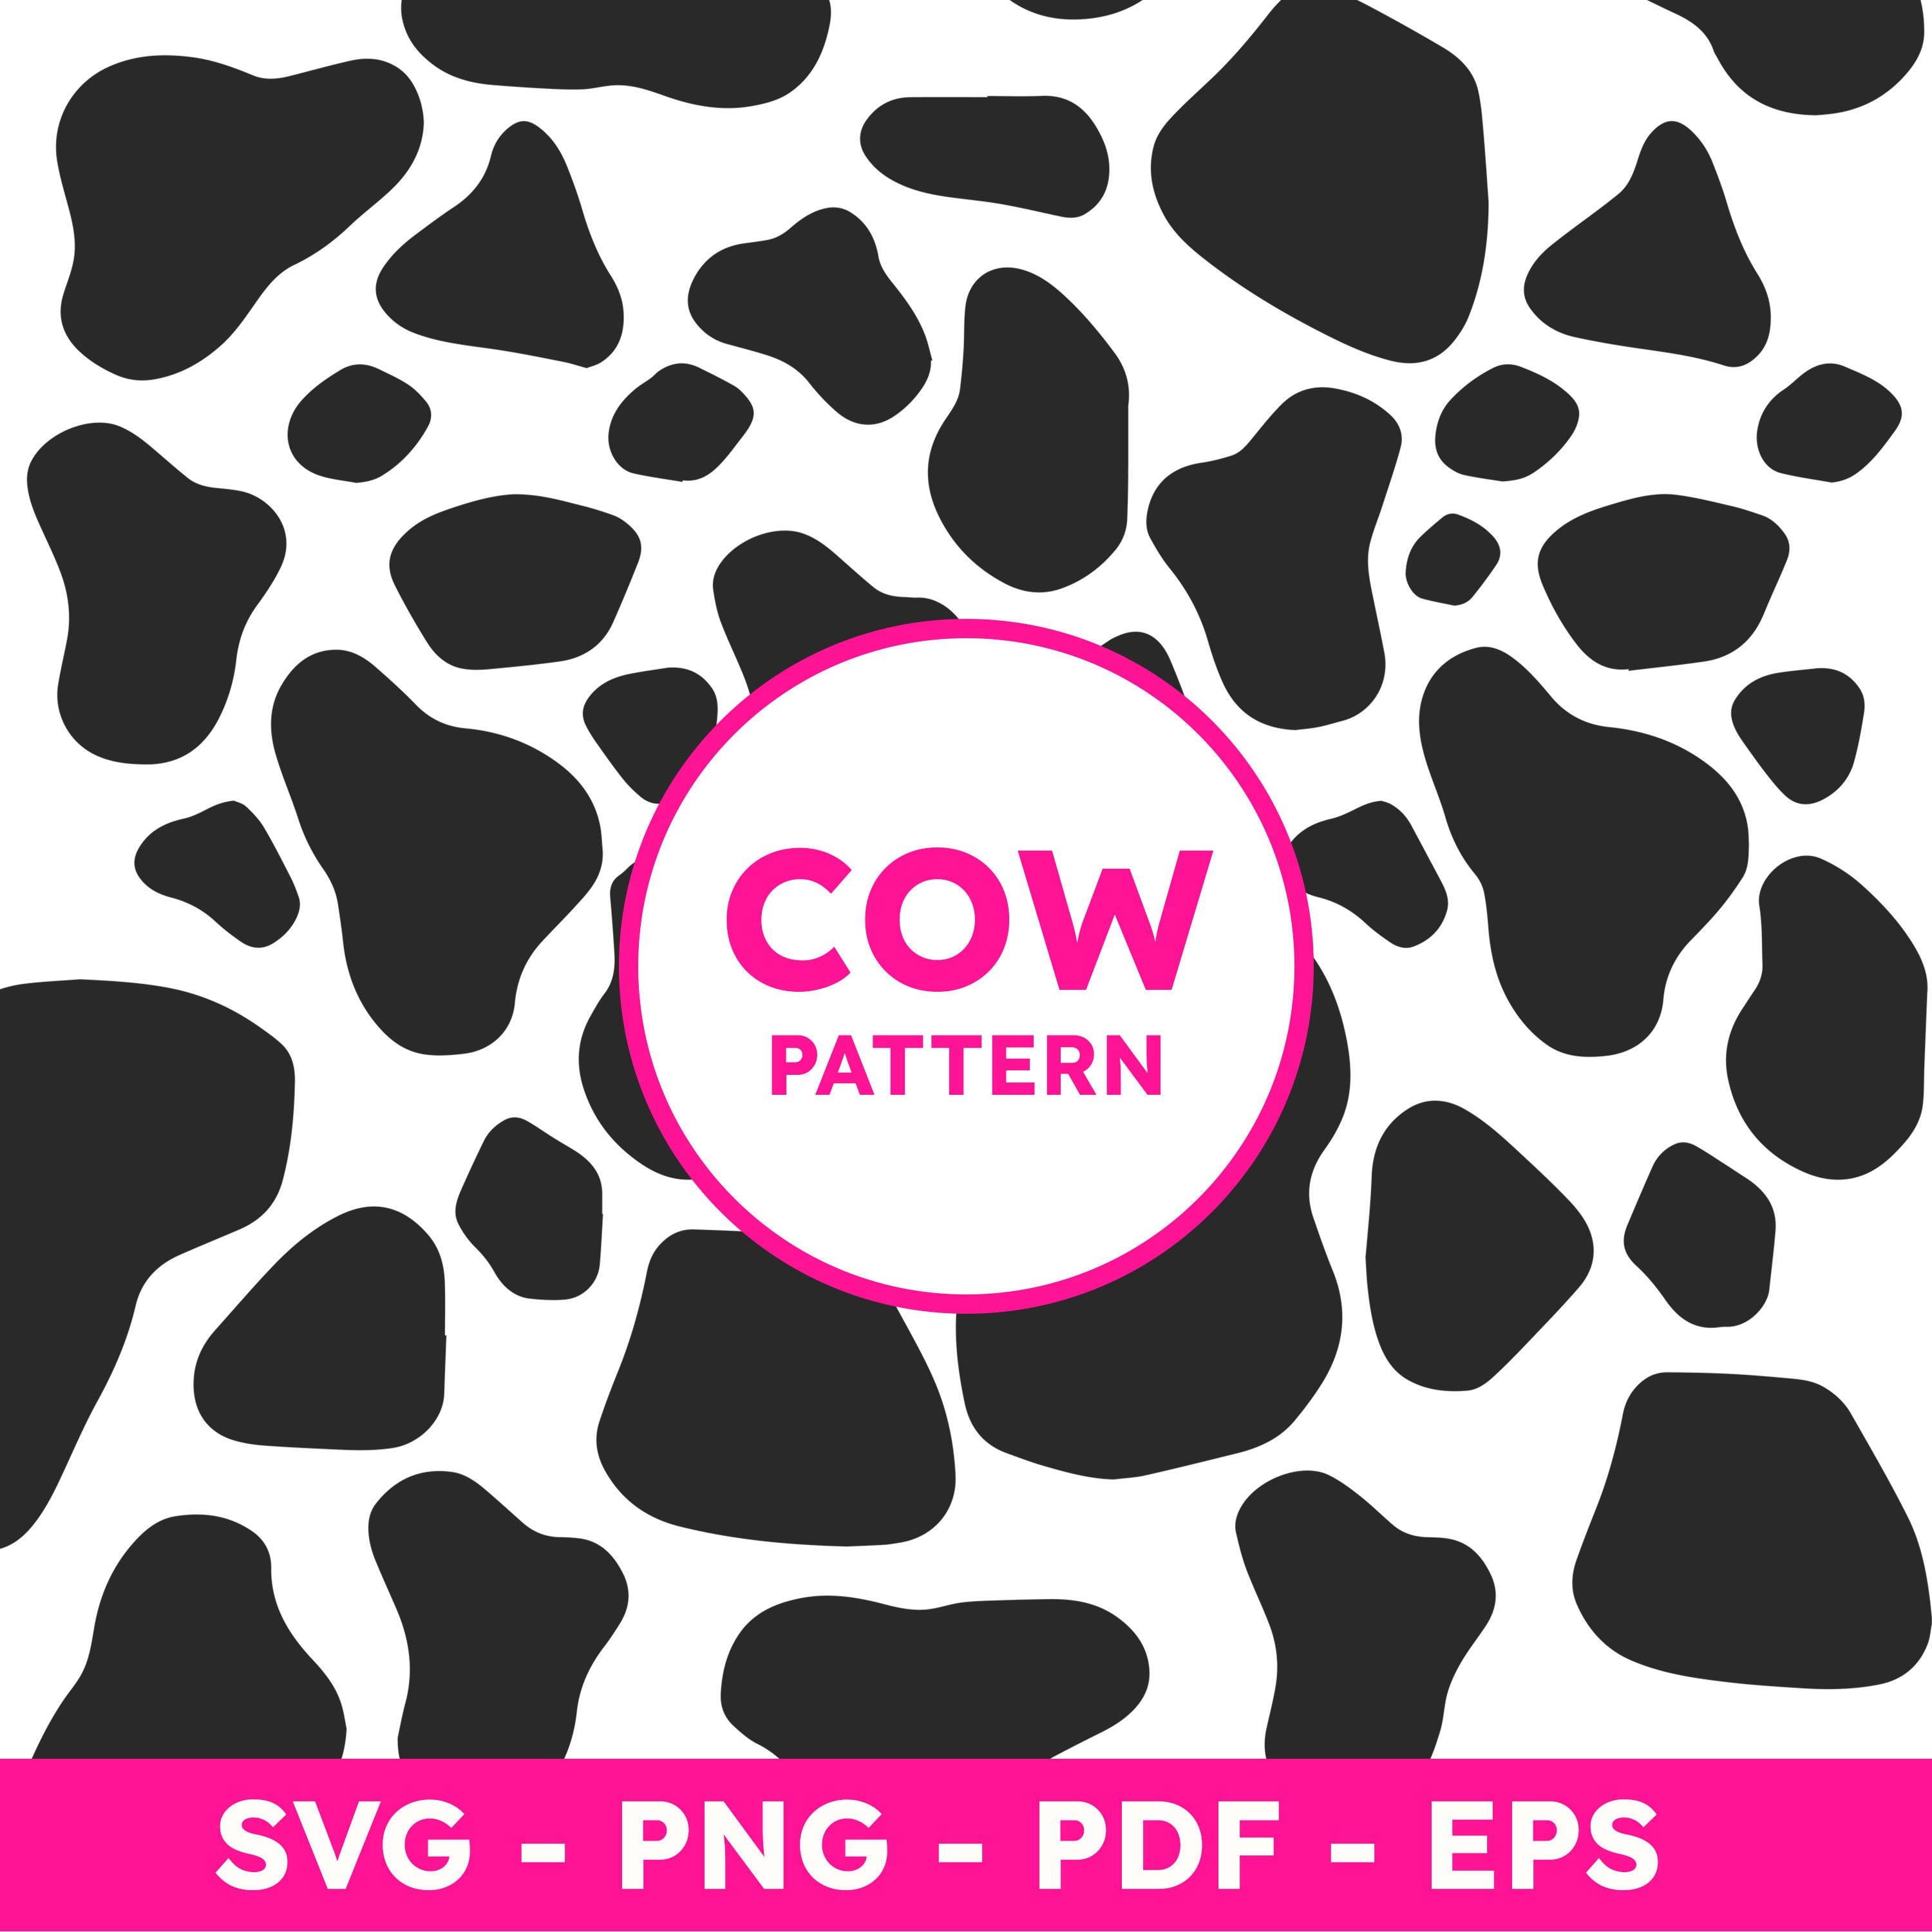 Cow Print Pattern | Seamless Repeatable Cow Print Svg Pdf Jpg Vector AI  Download | Black and White Cow Print Digital Paper Downloads MP55